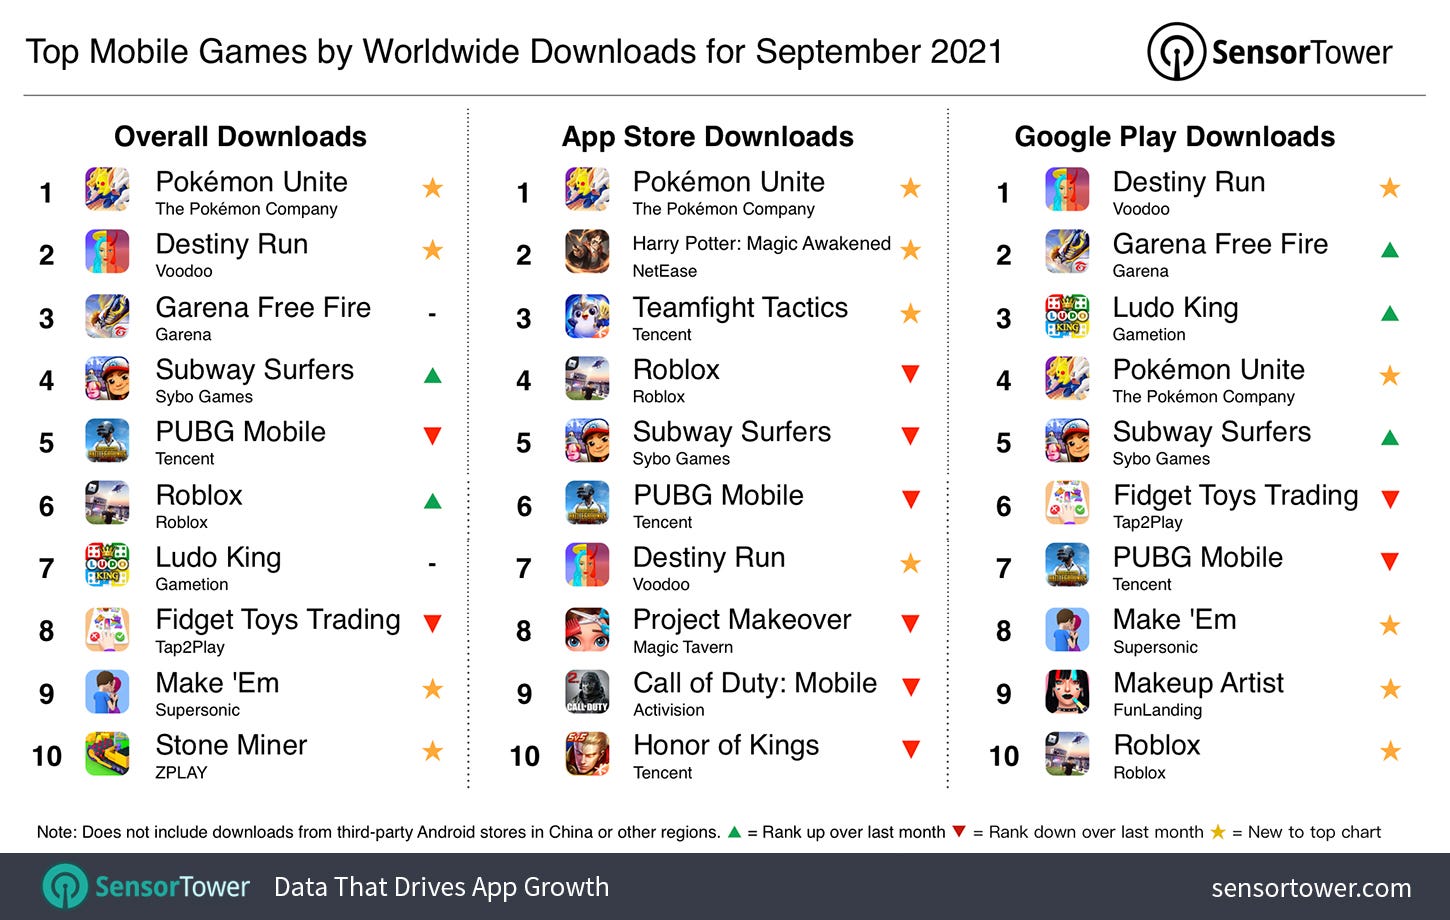 Top Mobile Games Worldwide for September 2021 by Downloads